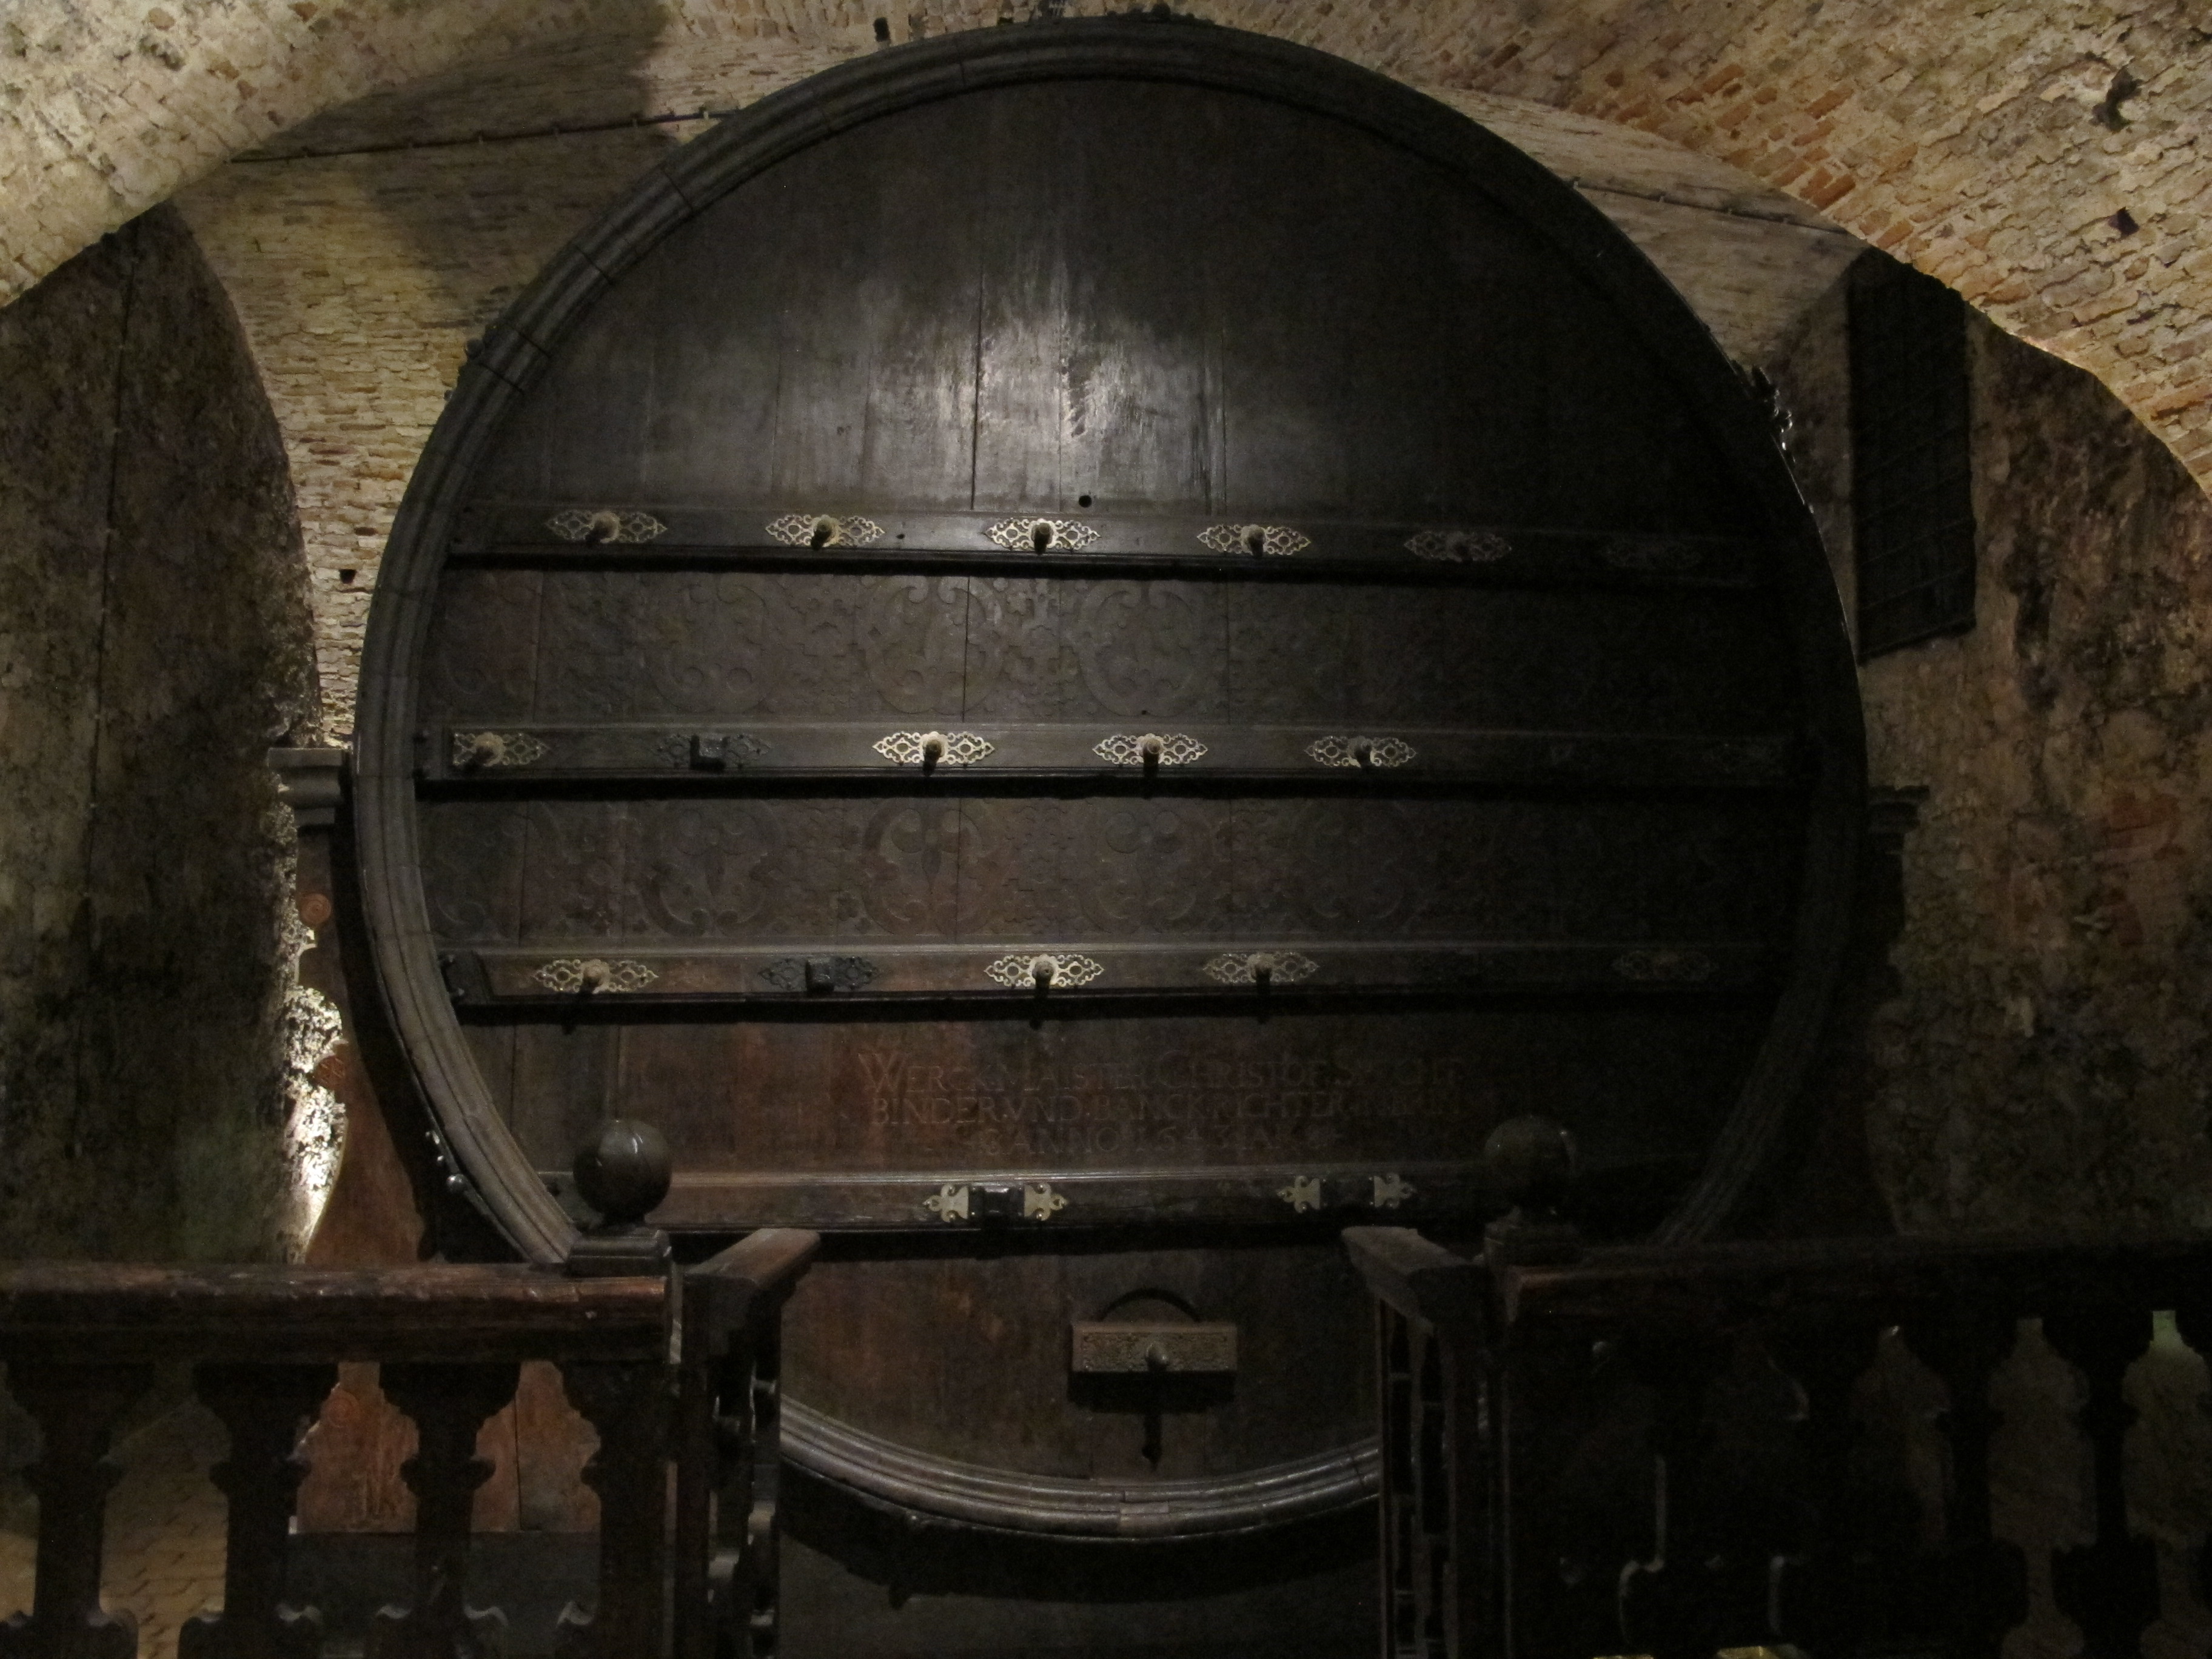 Giant wooden barrel - over 101 000 l of wine can fit inside!